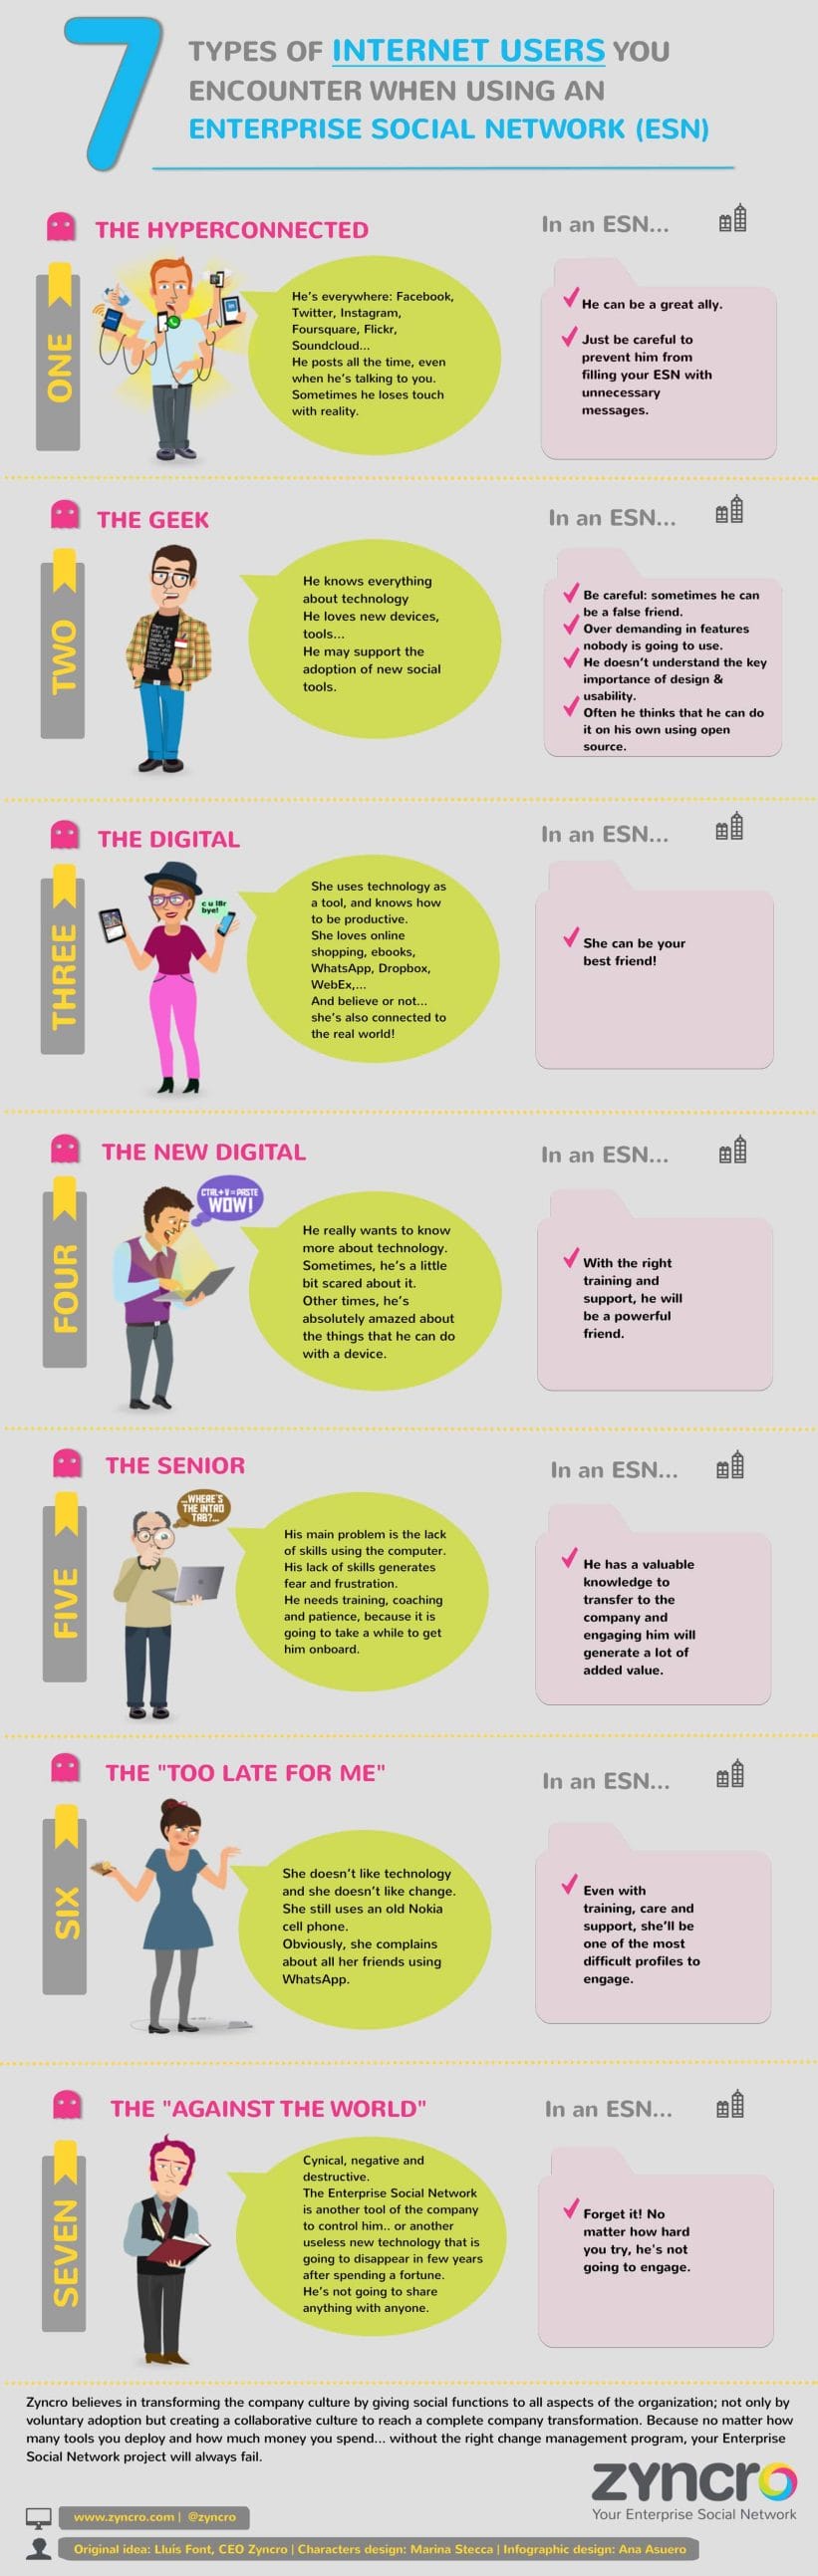 [INFOGRAPHIC] 7 types of internet users you encounter when using an Enterprise Social Network 